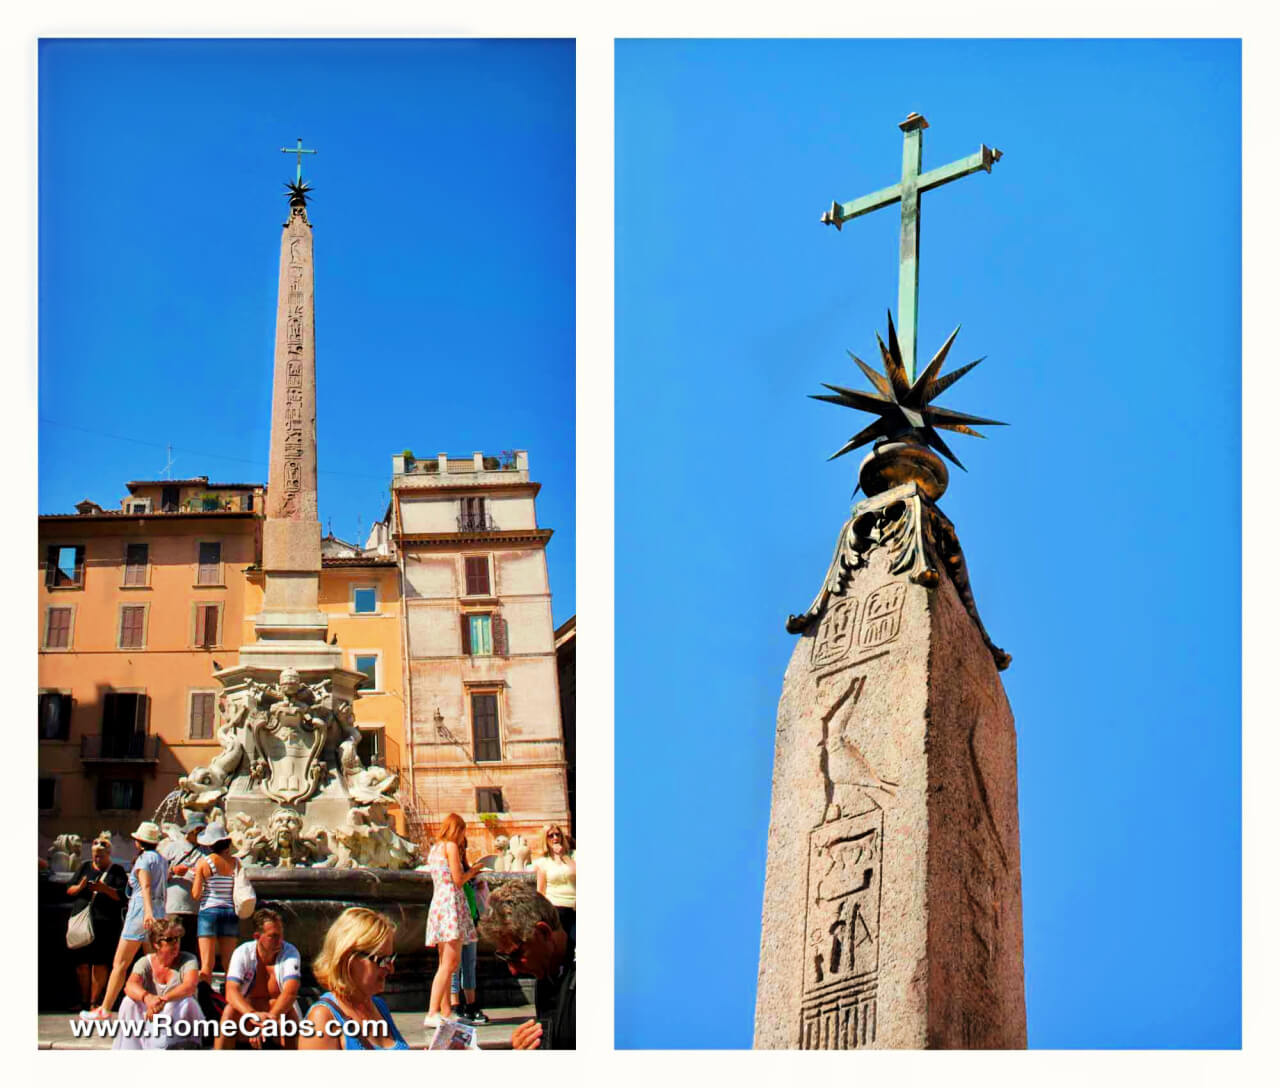 10 unique things about the Pantheon in Rome ancient Egyptian Obelisk Piazza della Rotonda